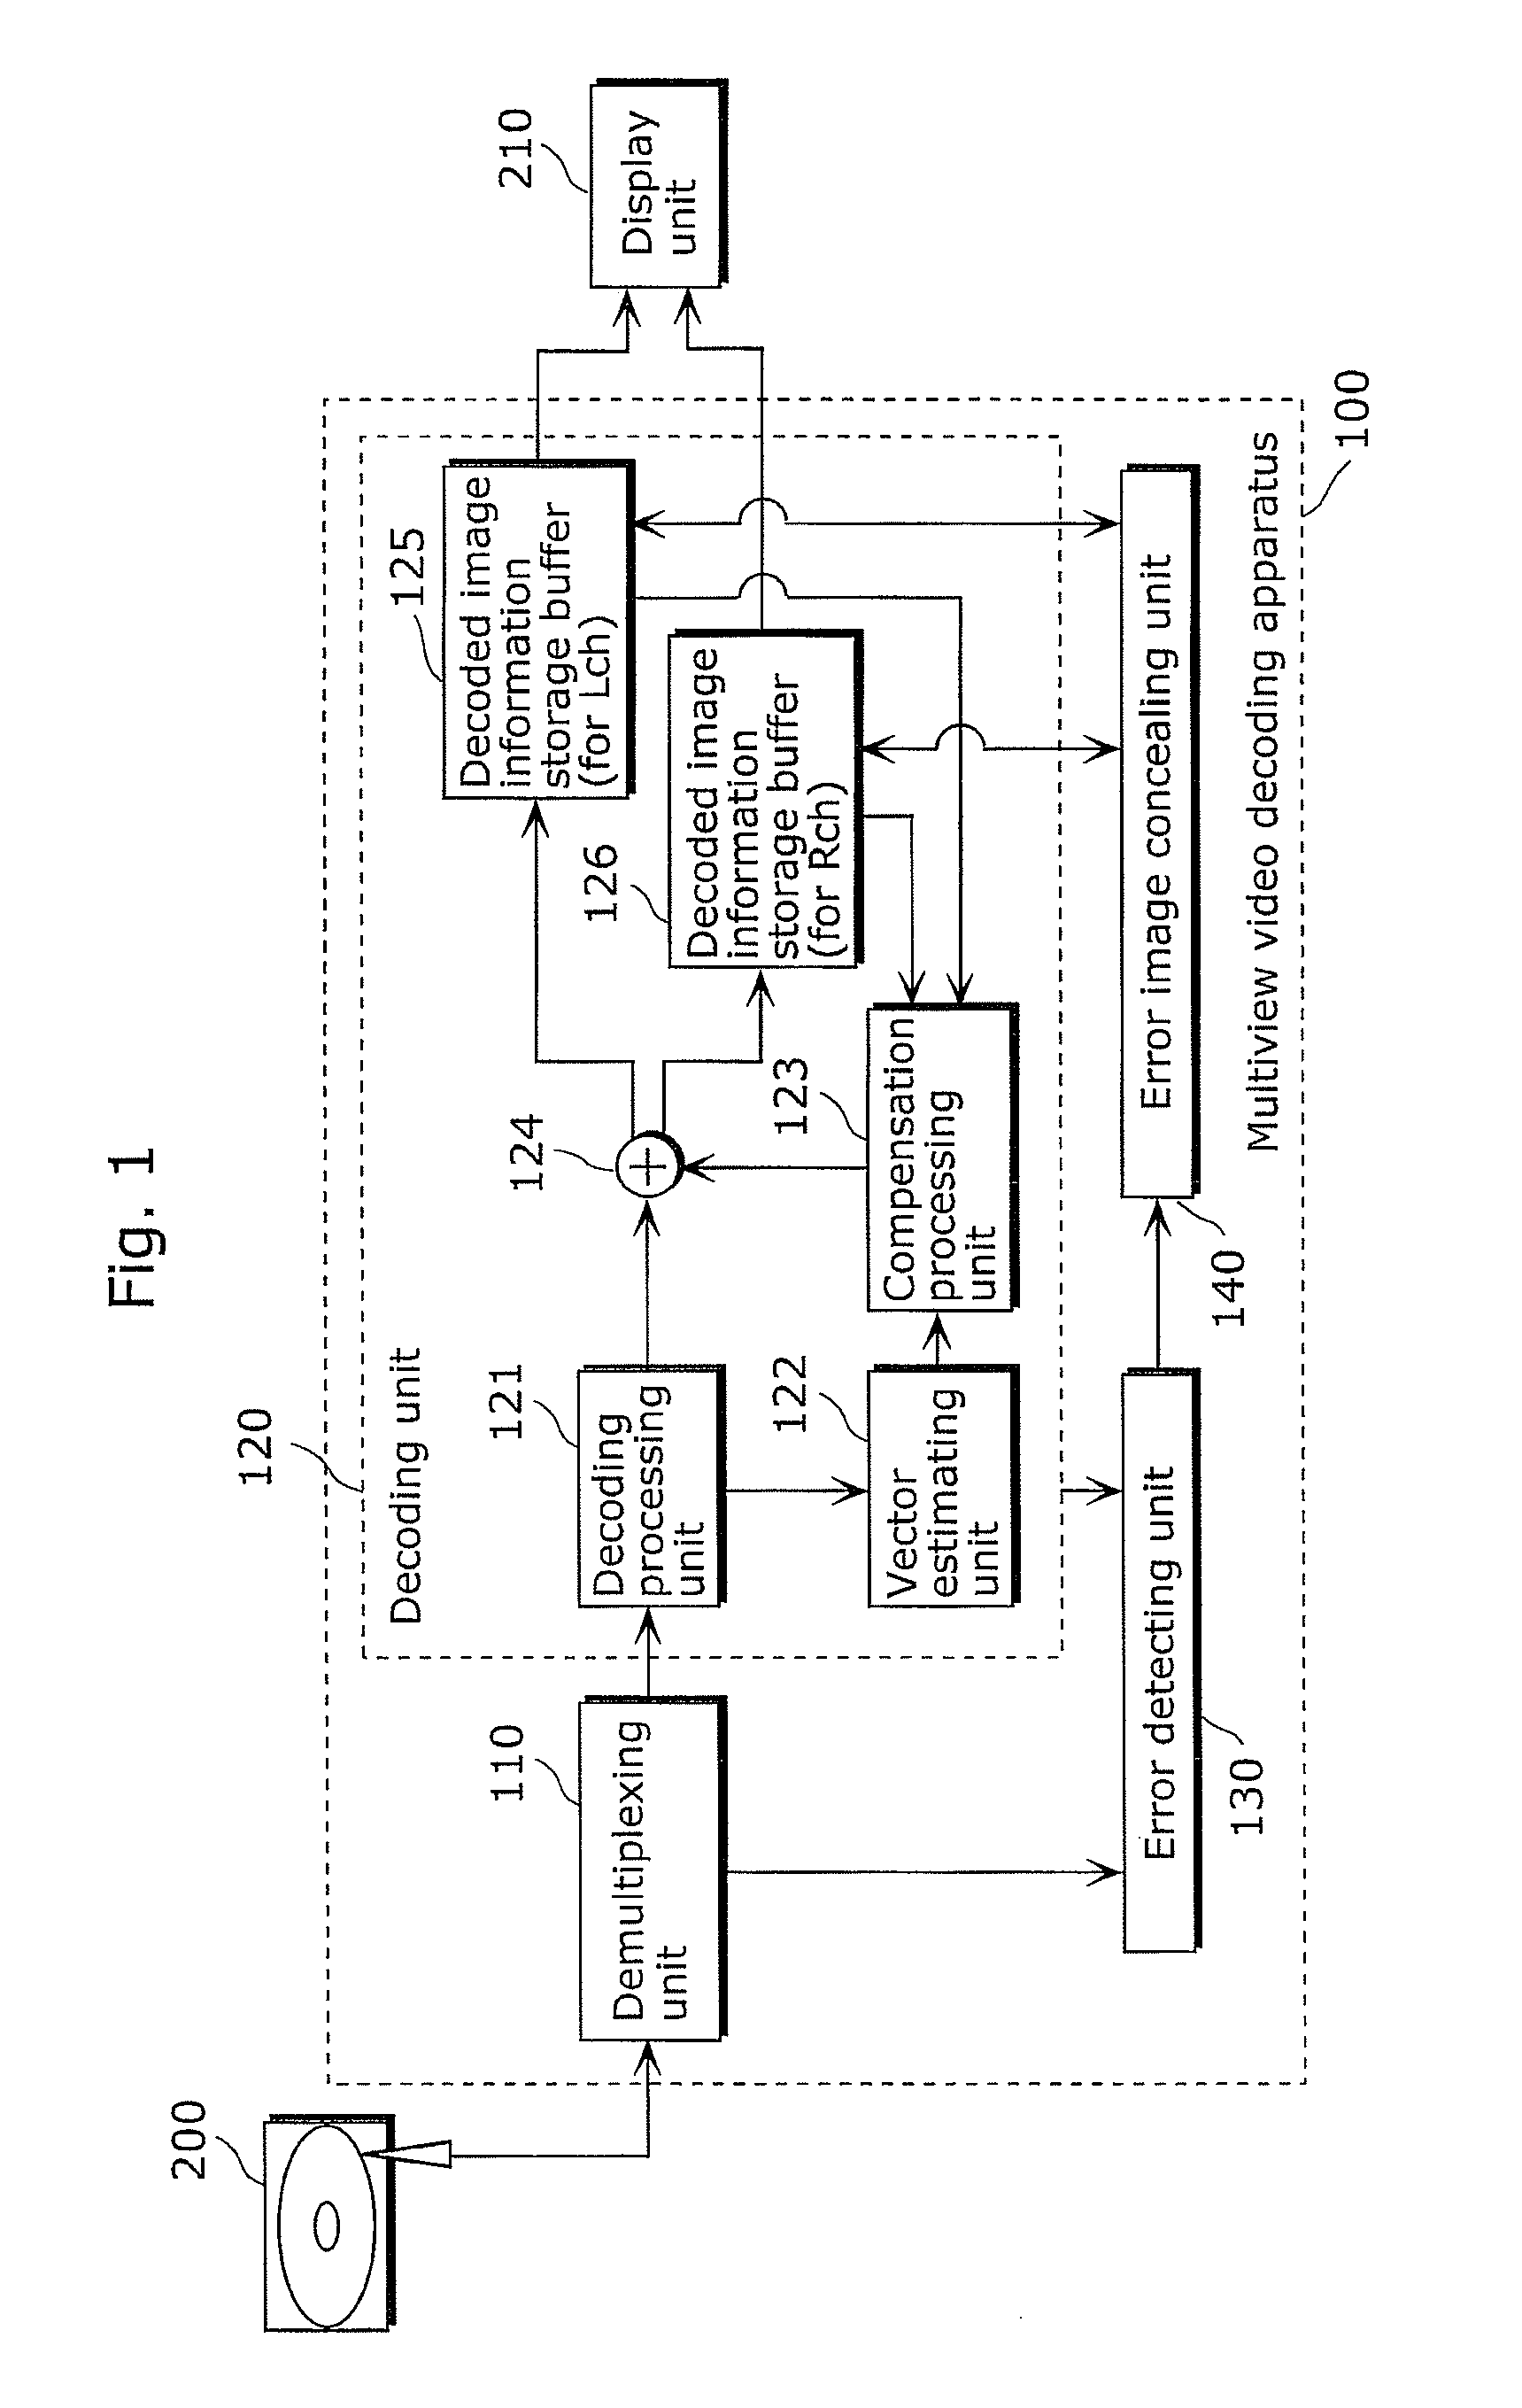 Multiview video decoding apparatus and multiview video decoding method